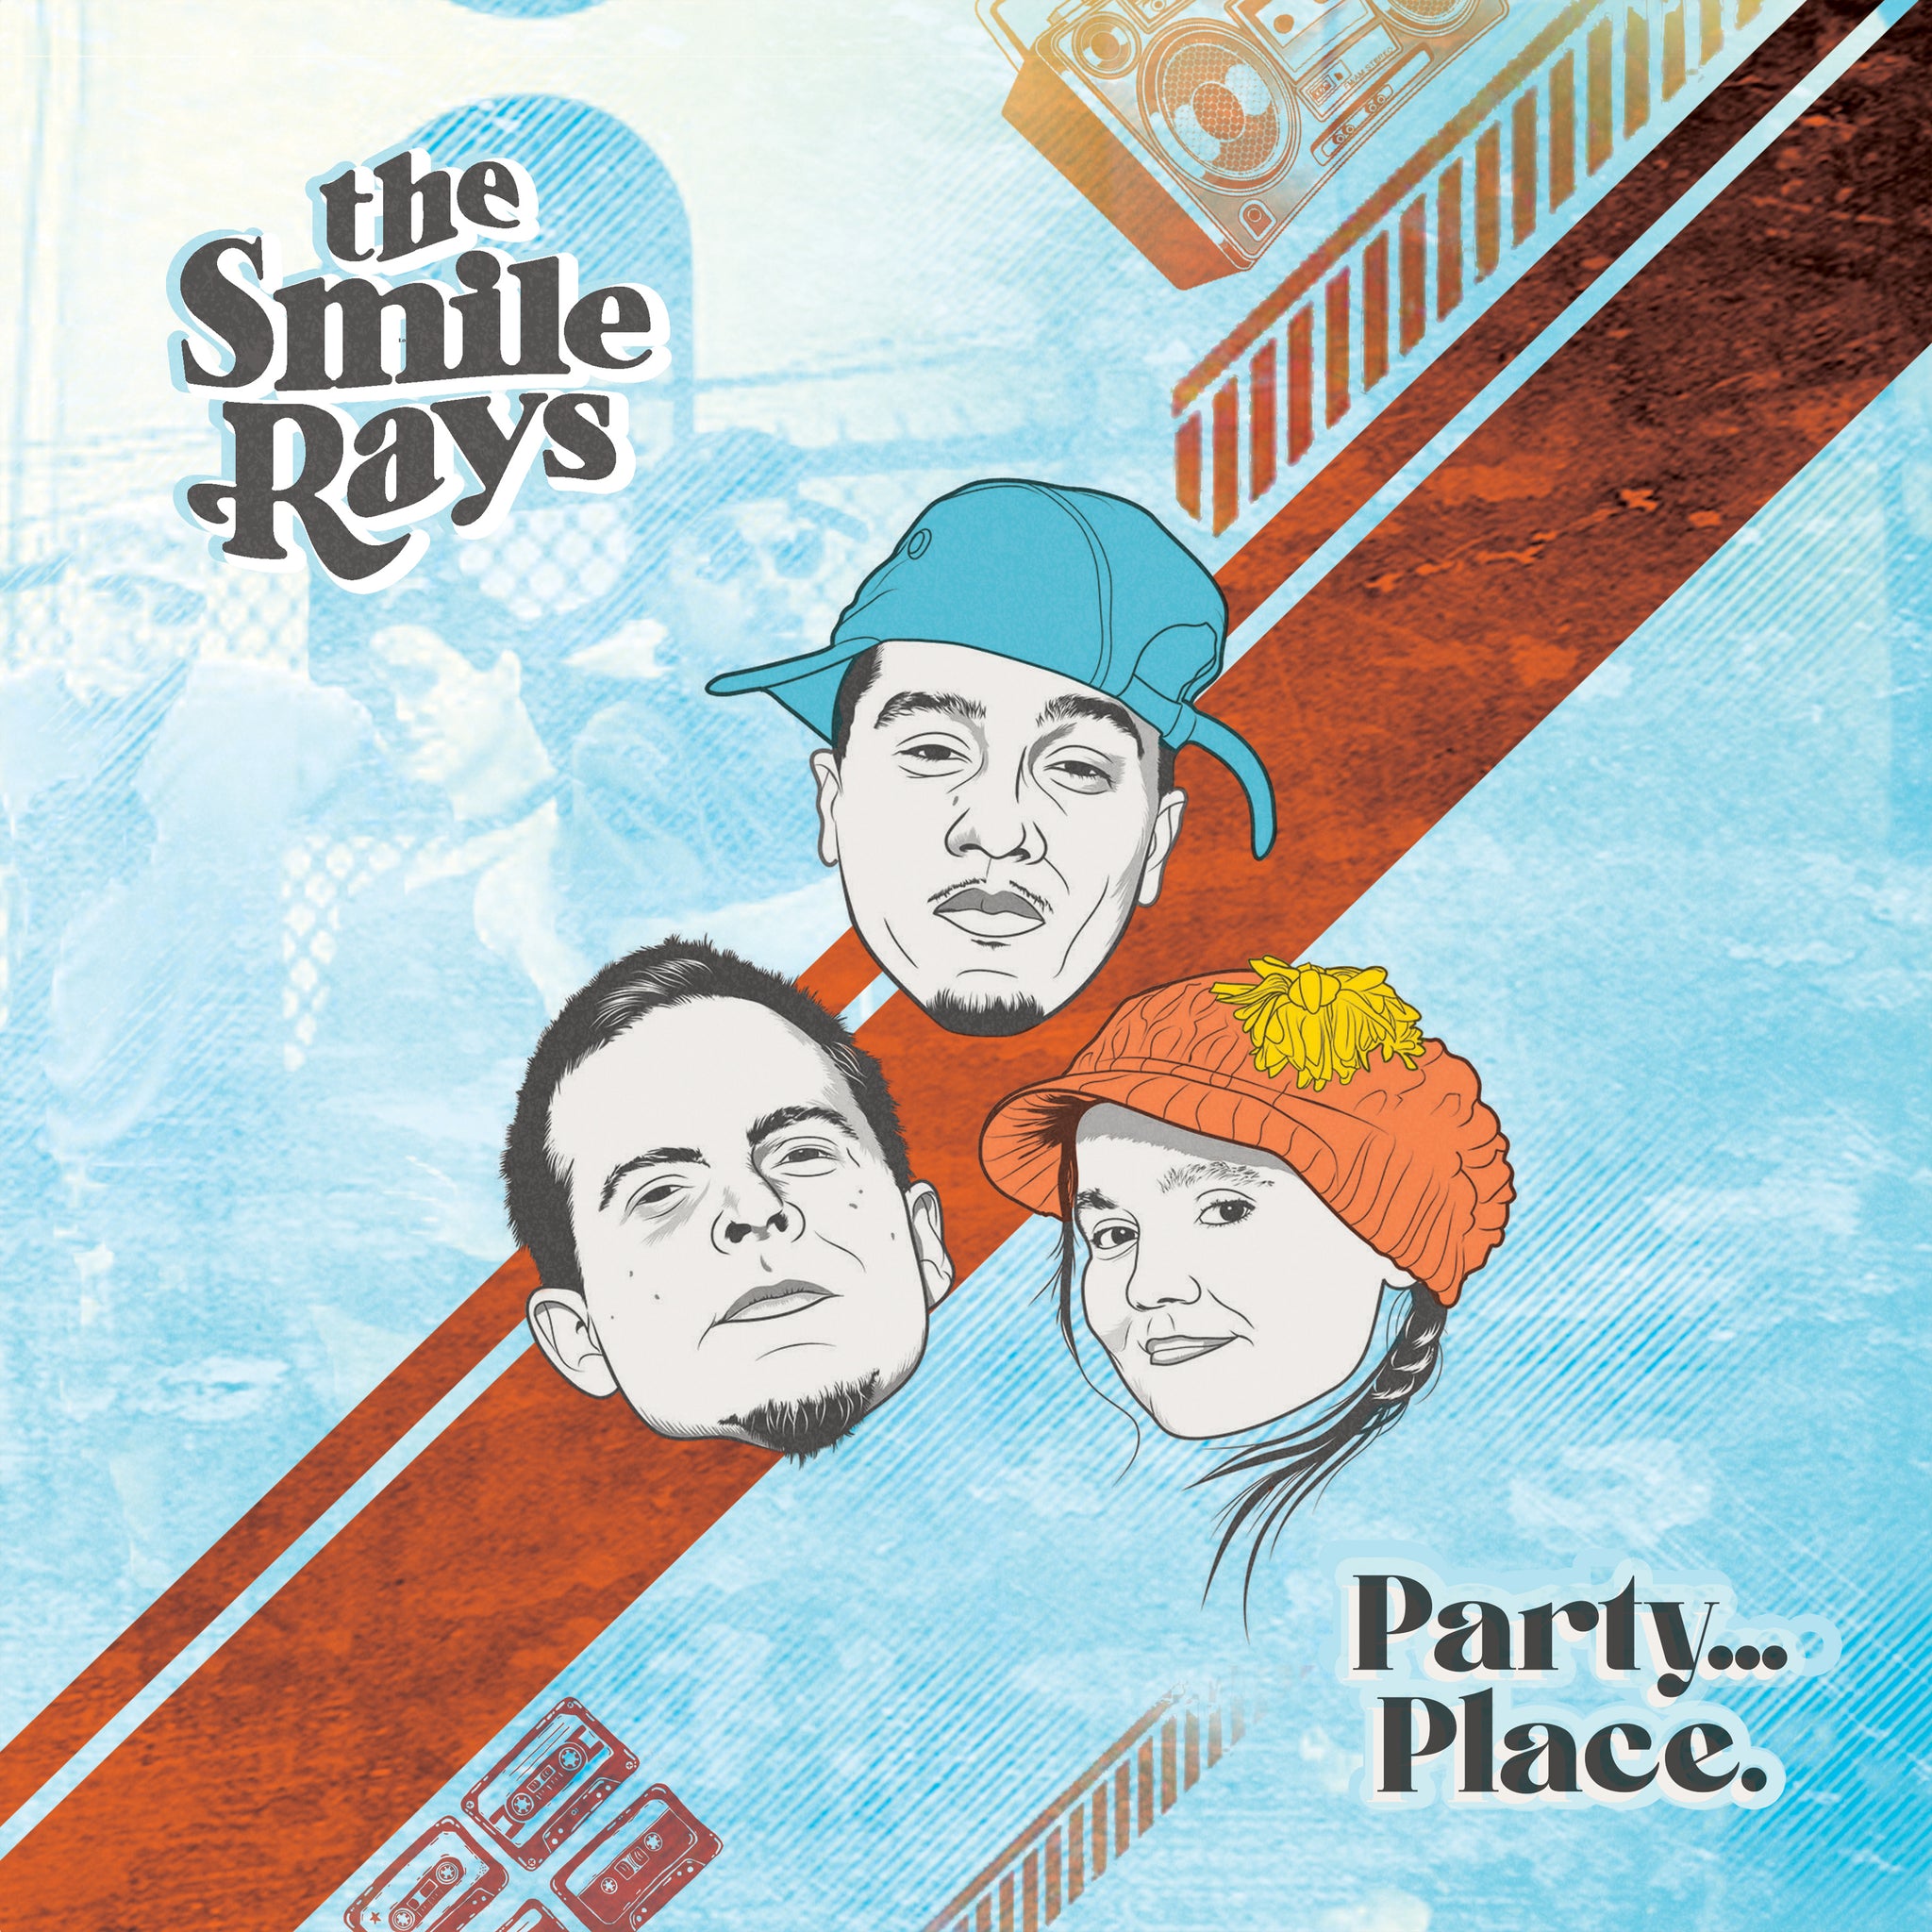 The Smile Rays - Party...Place. (FP028)